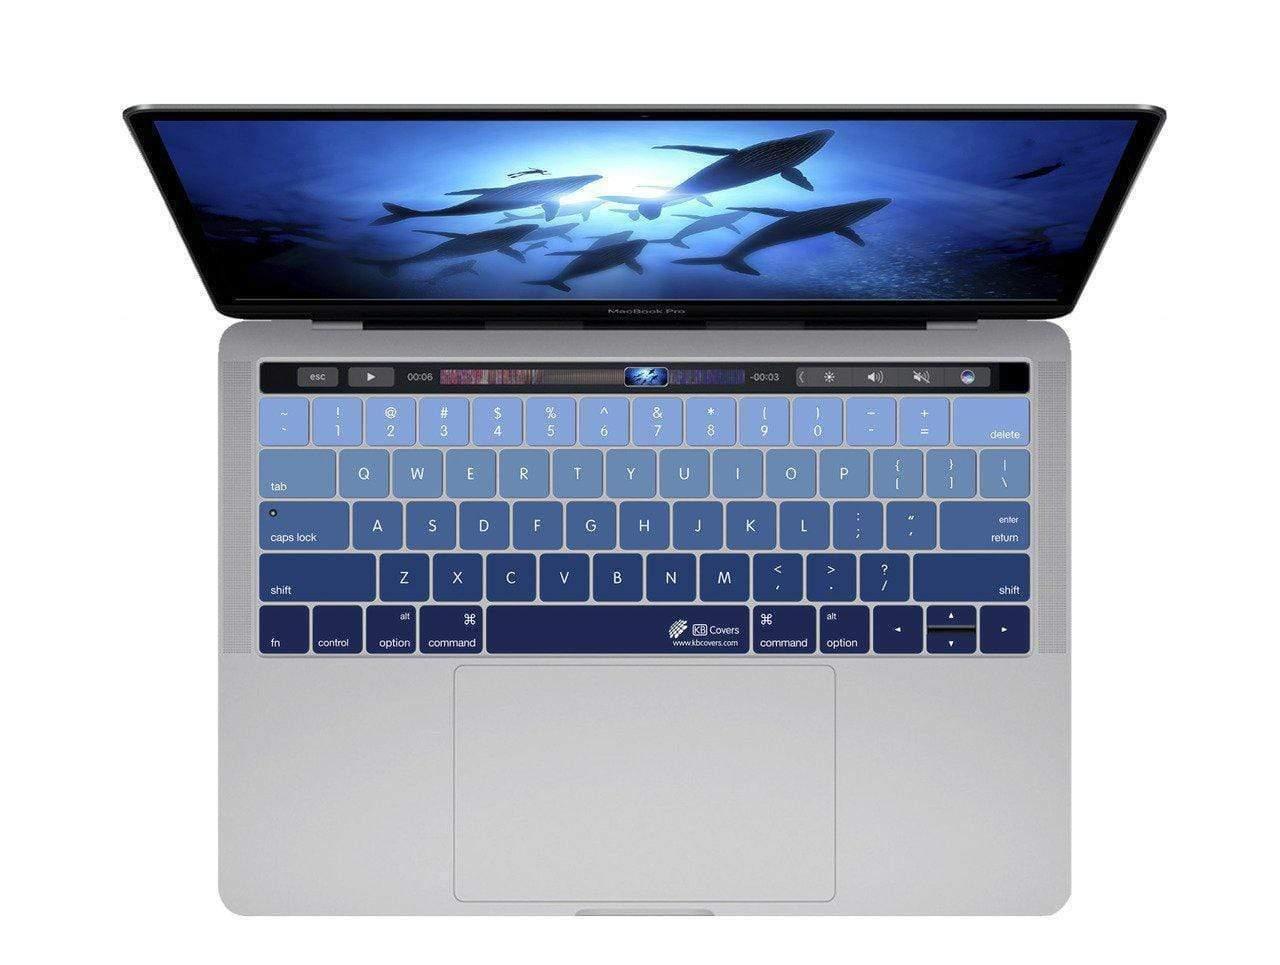 kb covers keyboard cover for macbook pro 13 and 15 inch w touch bar deep blues